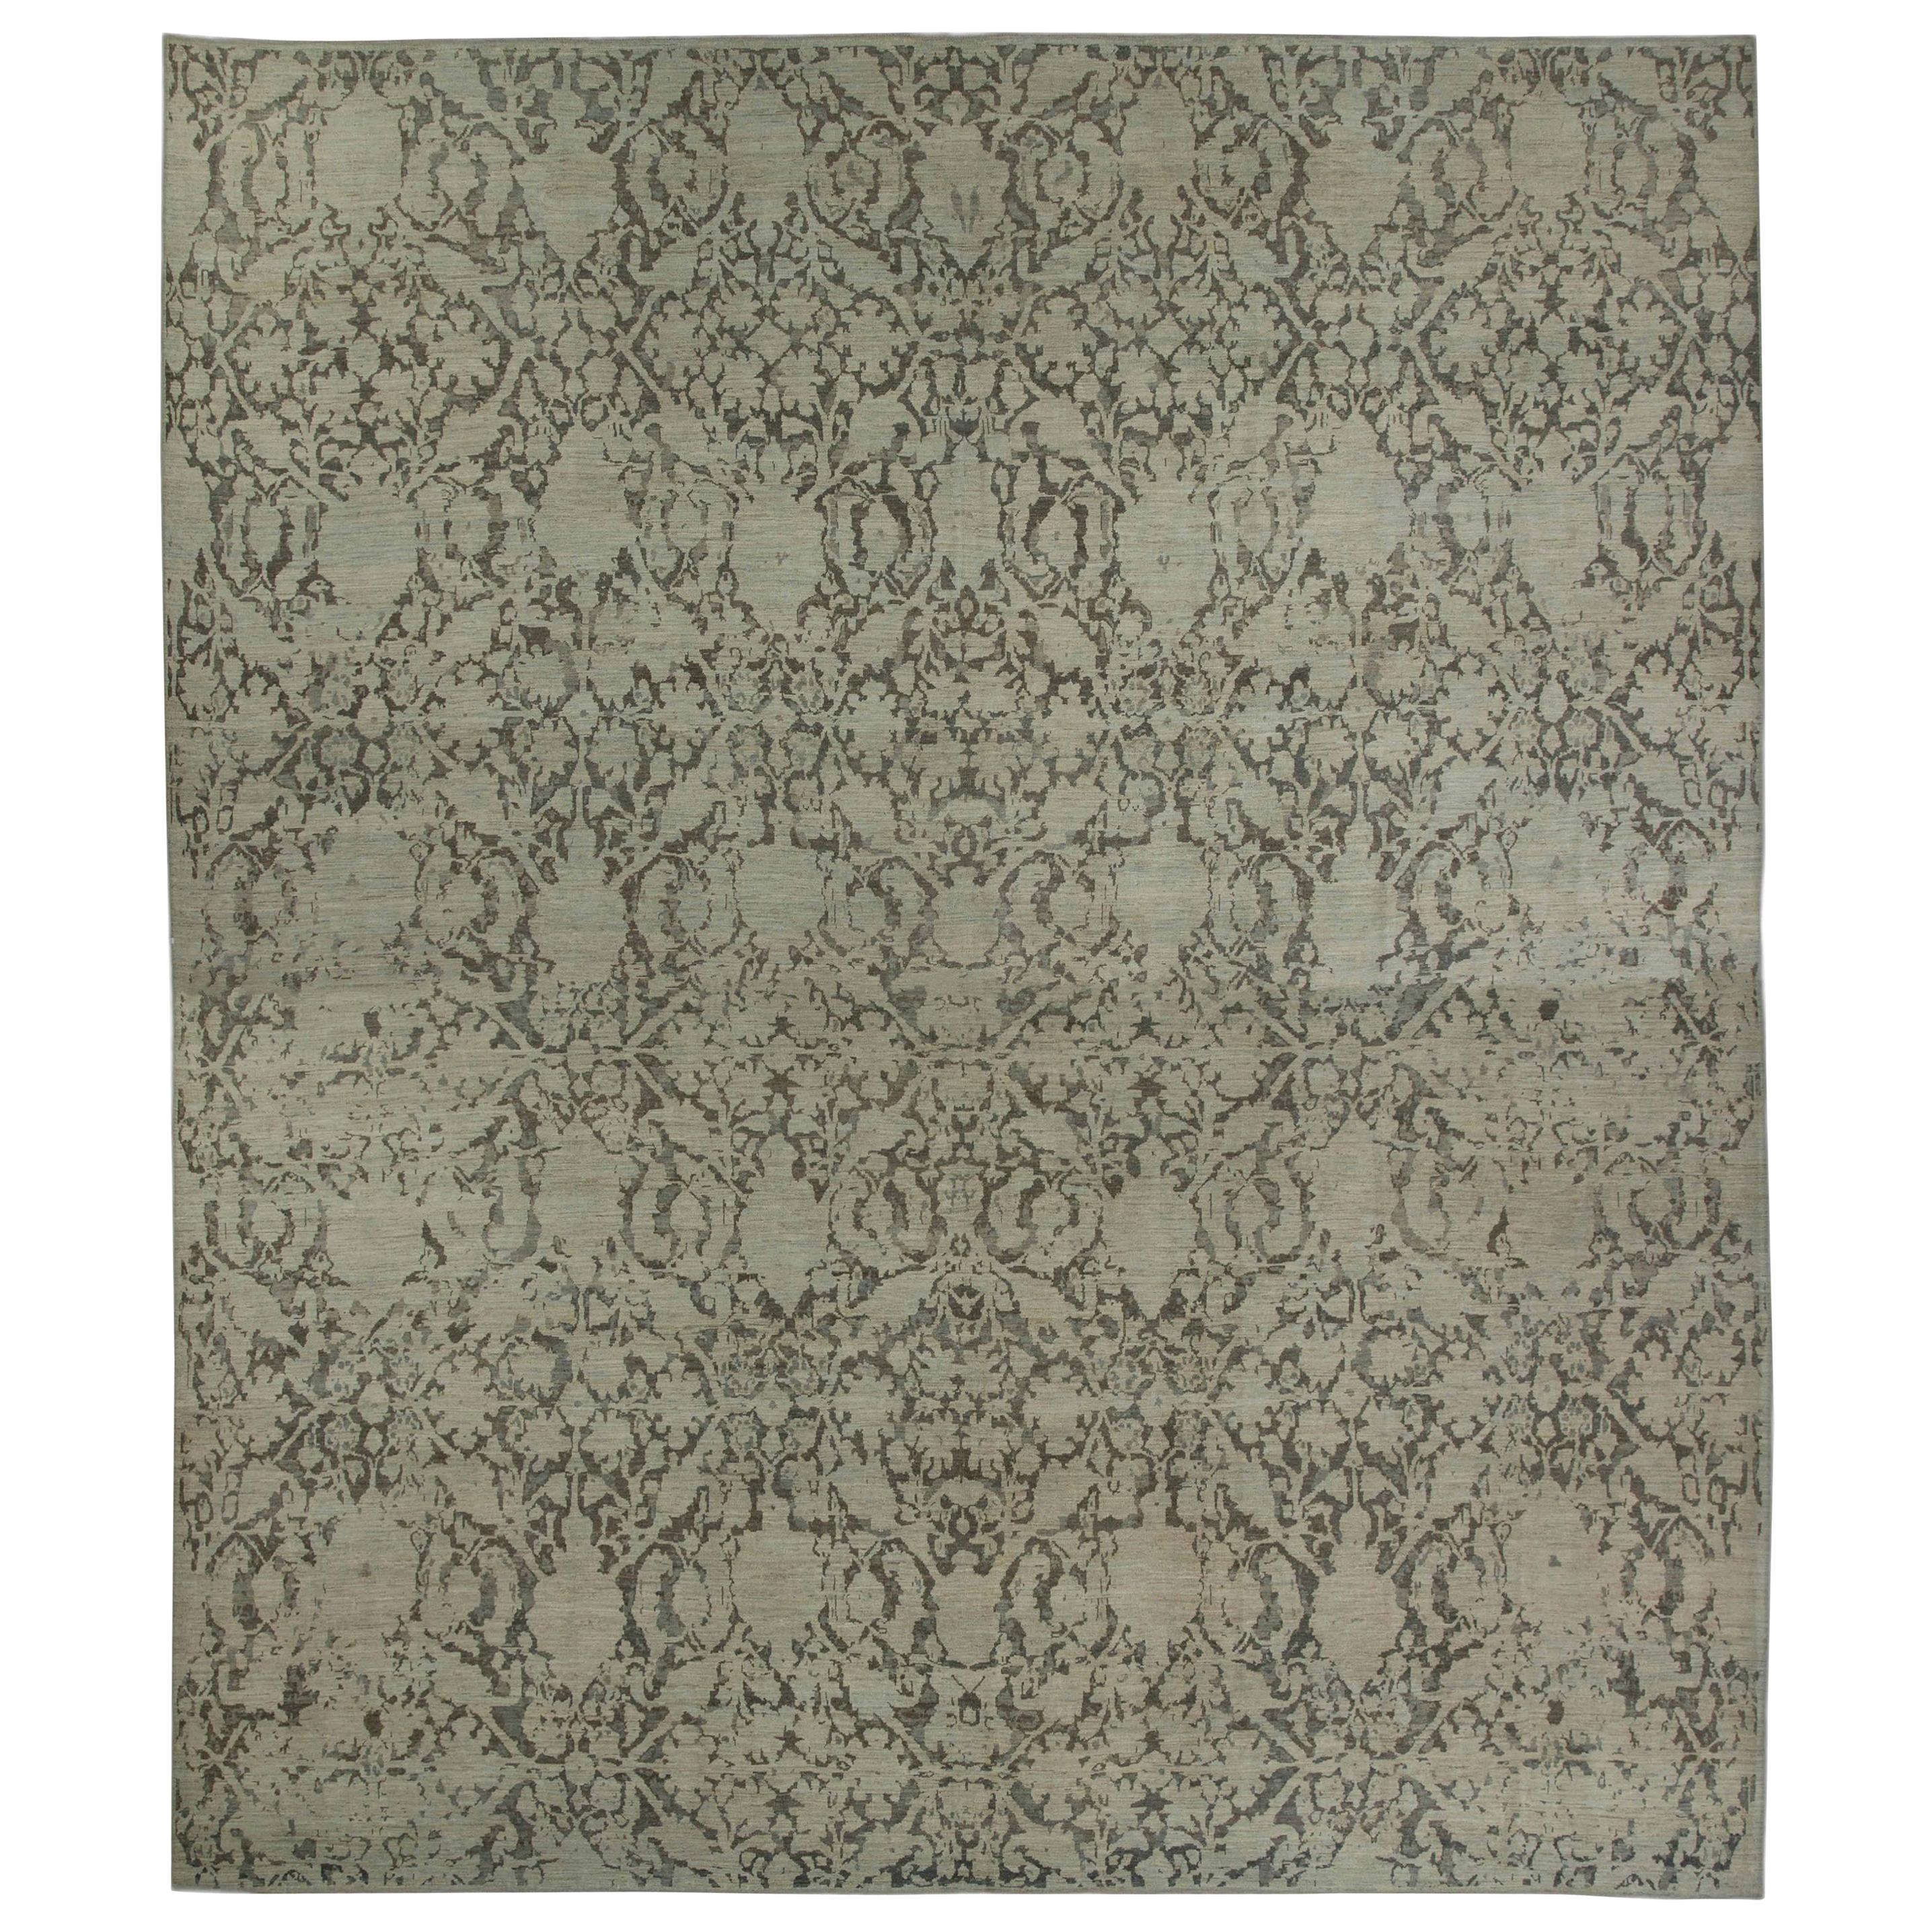 Oversized Turkish Sultanabad Style Rug with Black Floral Details on Beige Field For Sale